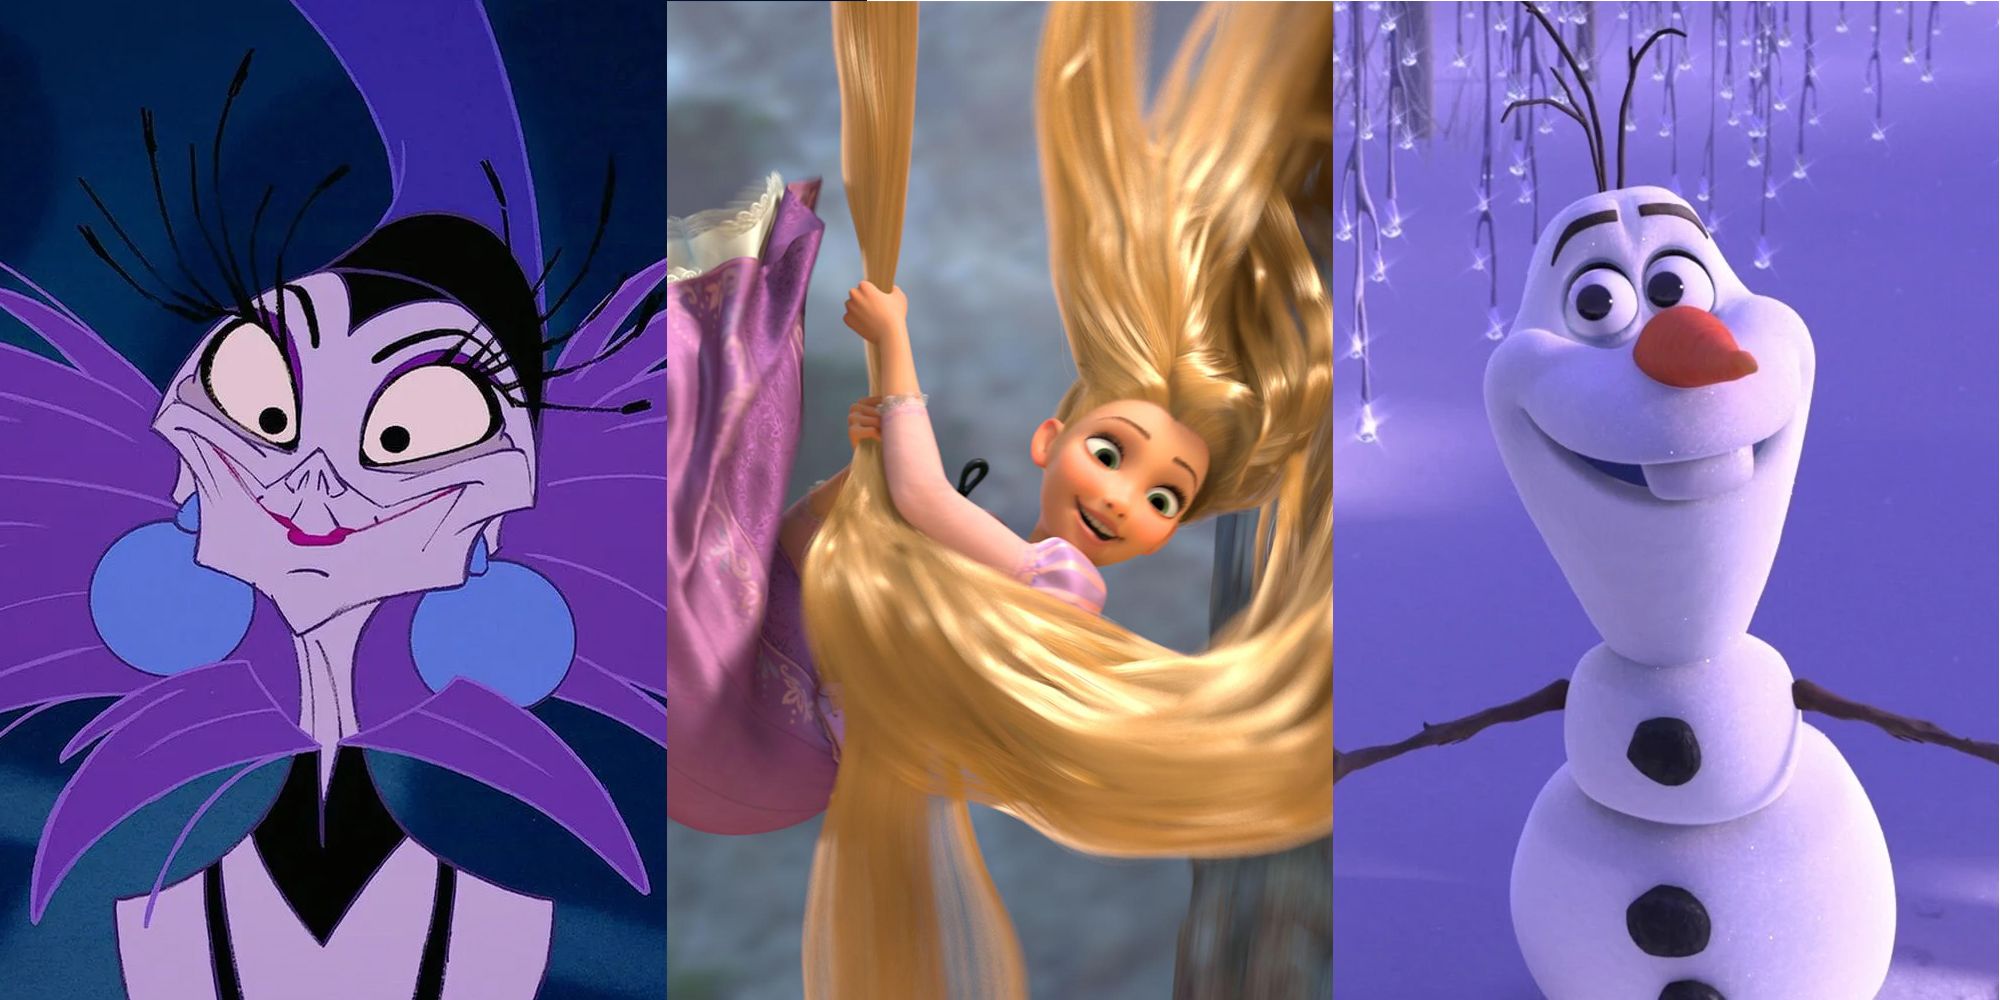 Yzma Smiling. Rapunzel swimming on hair. Olaf open arms.